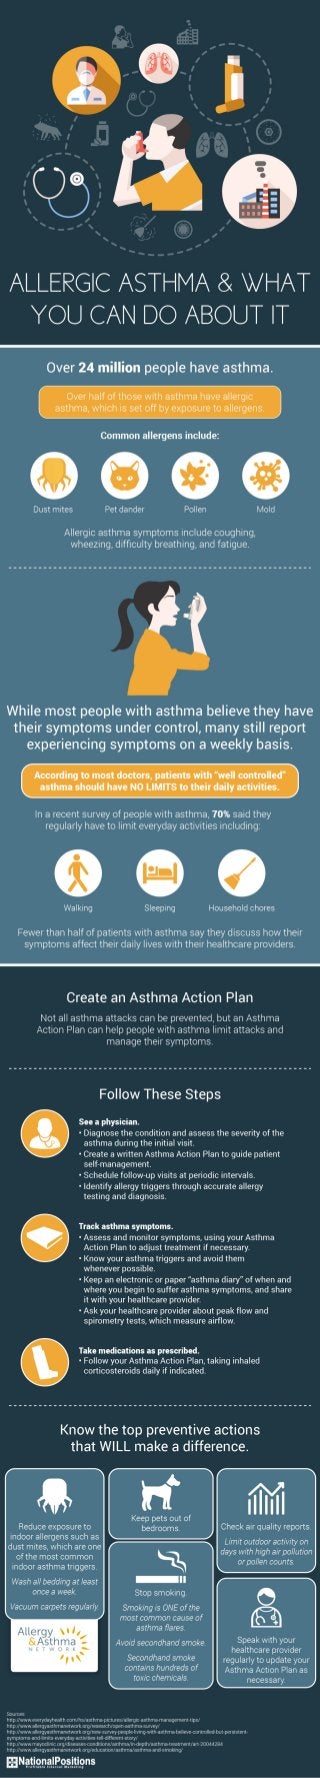 Allergic Asthma and What You Can Do About It